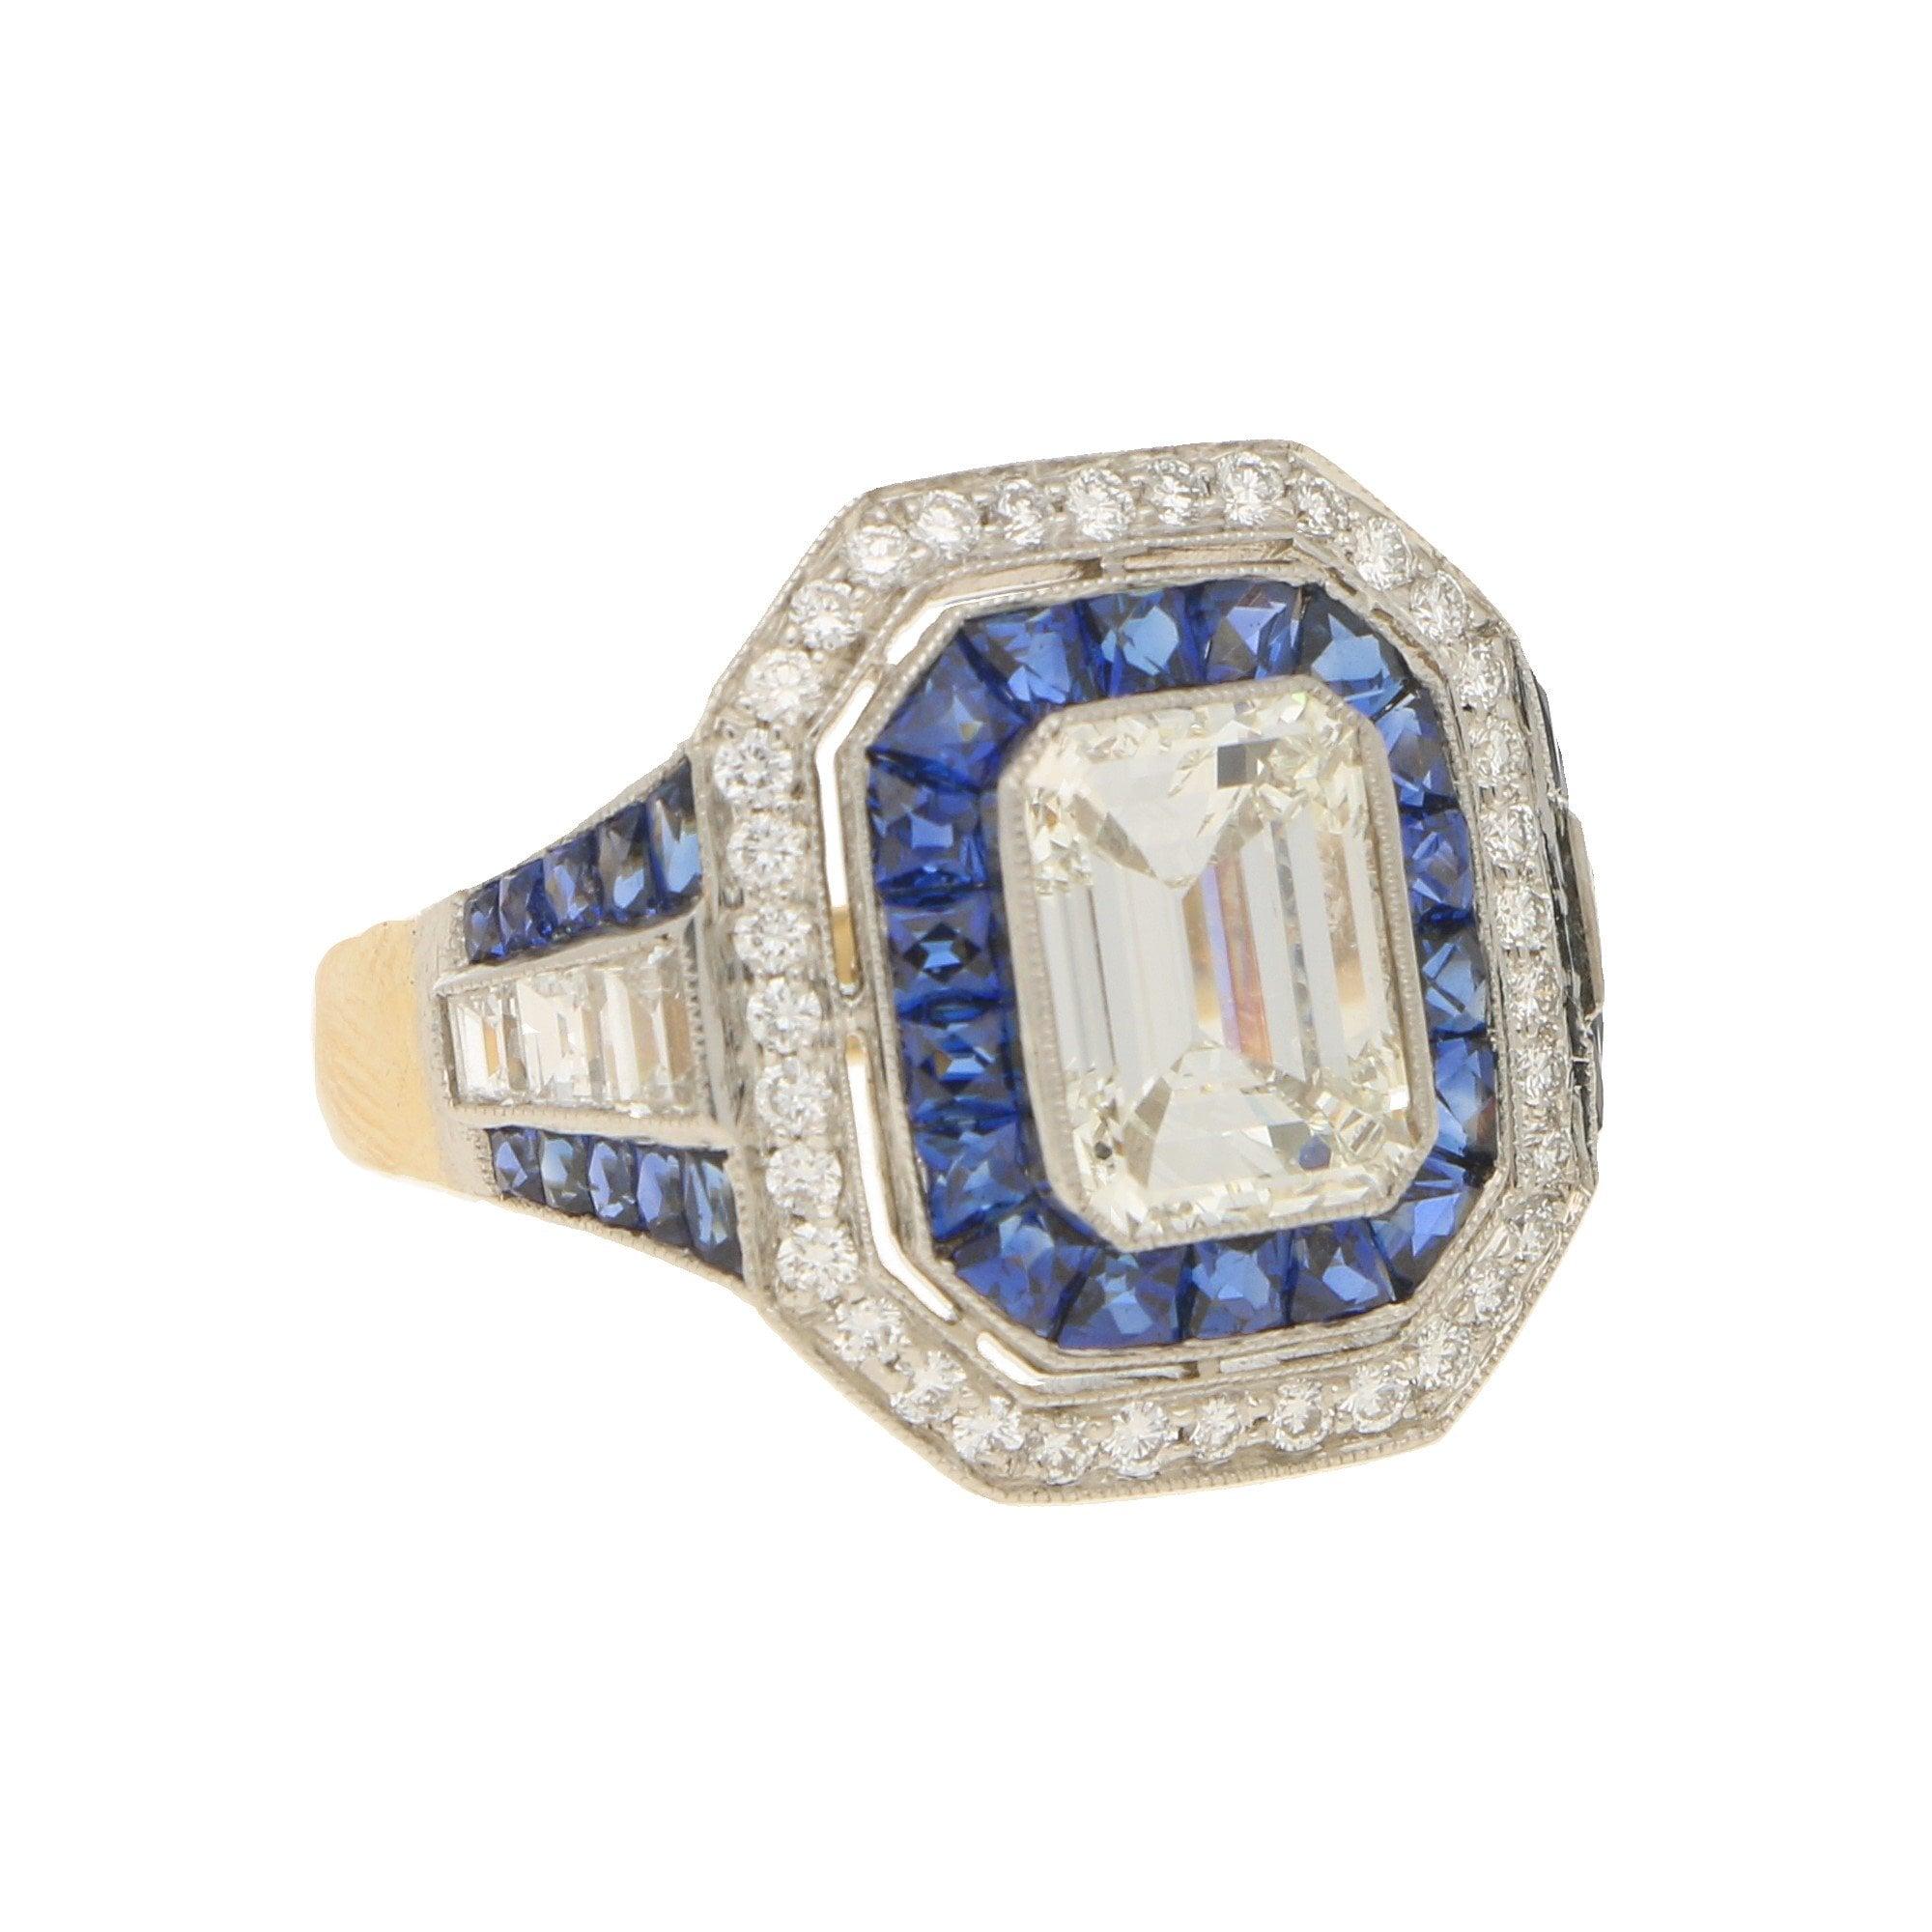 Main diamond accompanied by a GIA certificate stating it is 1.68 carats, I colour, SI1 clarity. Remaining diamonds approximately 0.70 carats in total, F/G colour, SI clarity. Sapphires approximately 1.30 carats in total, blue colour.

A vintage Art